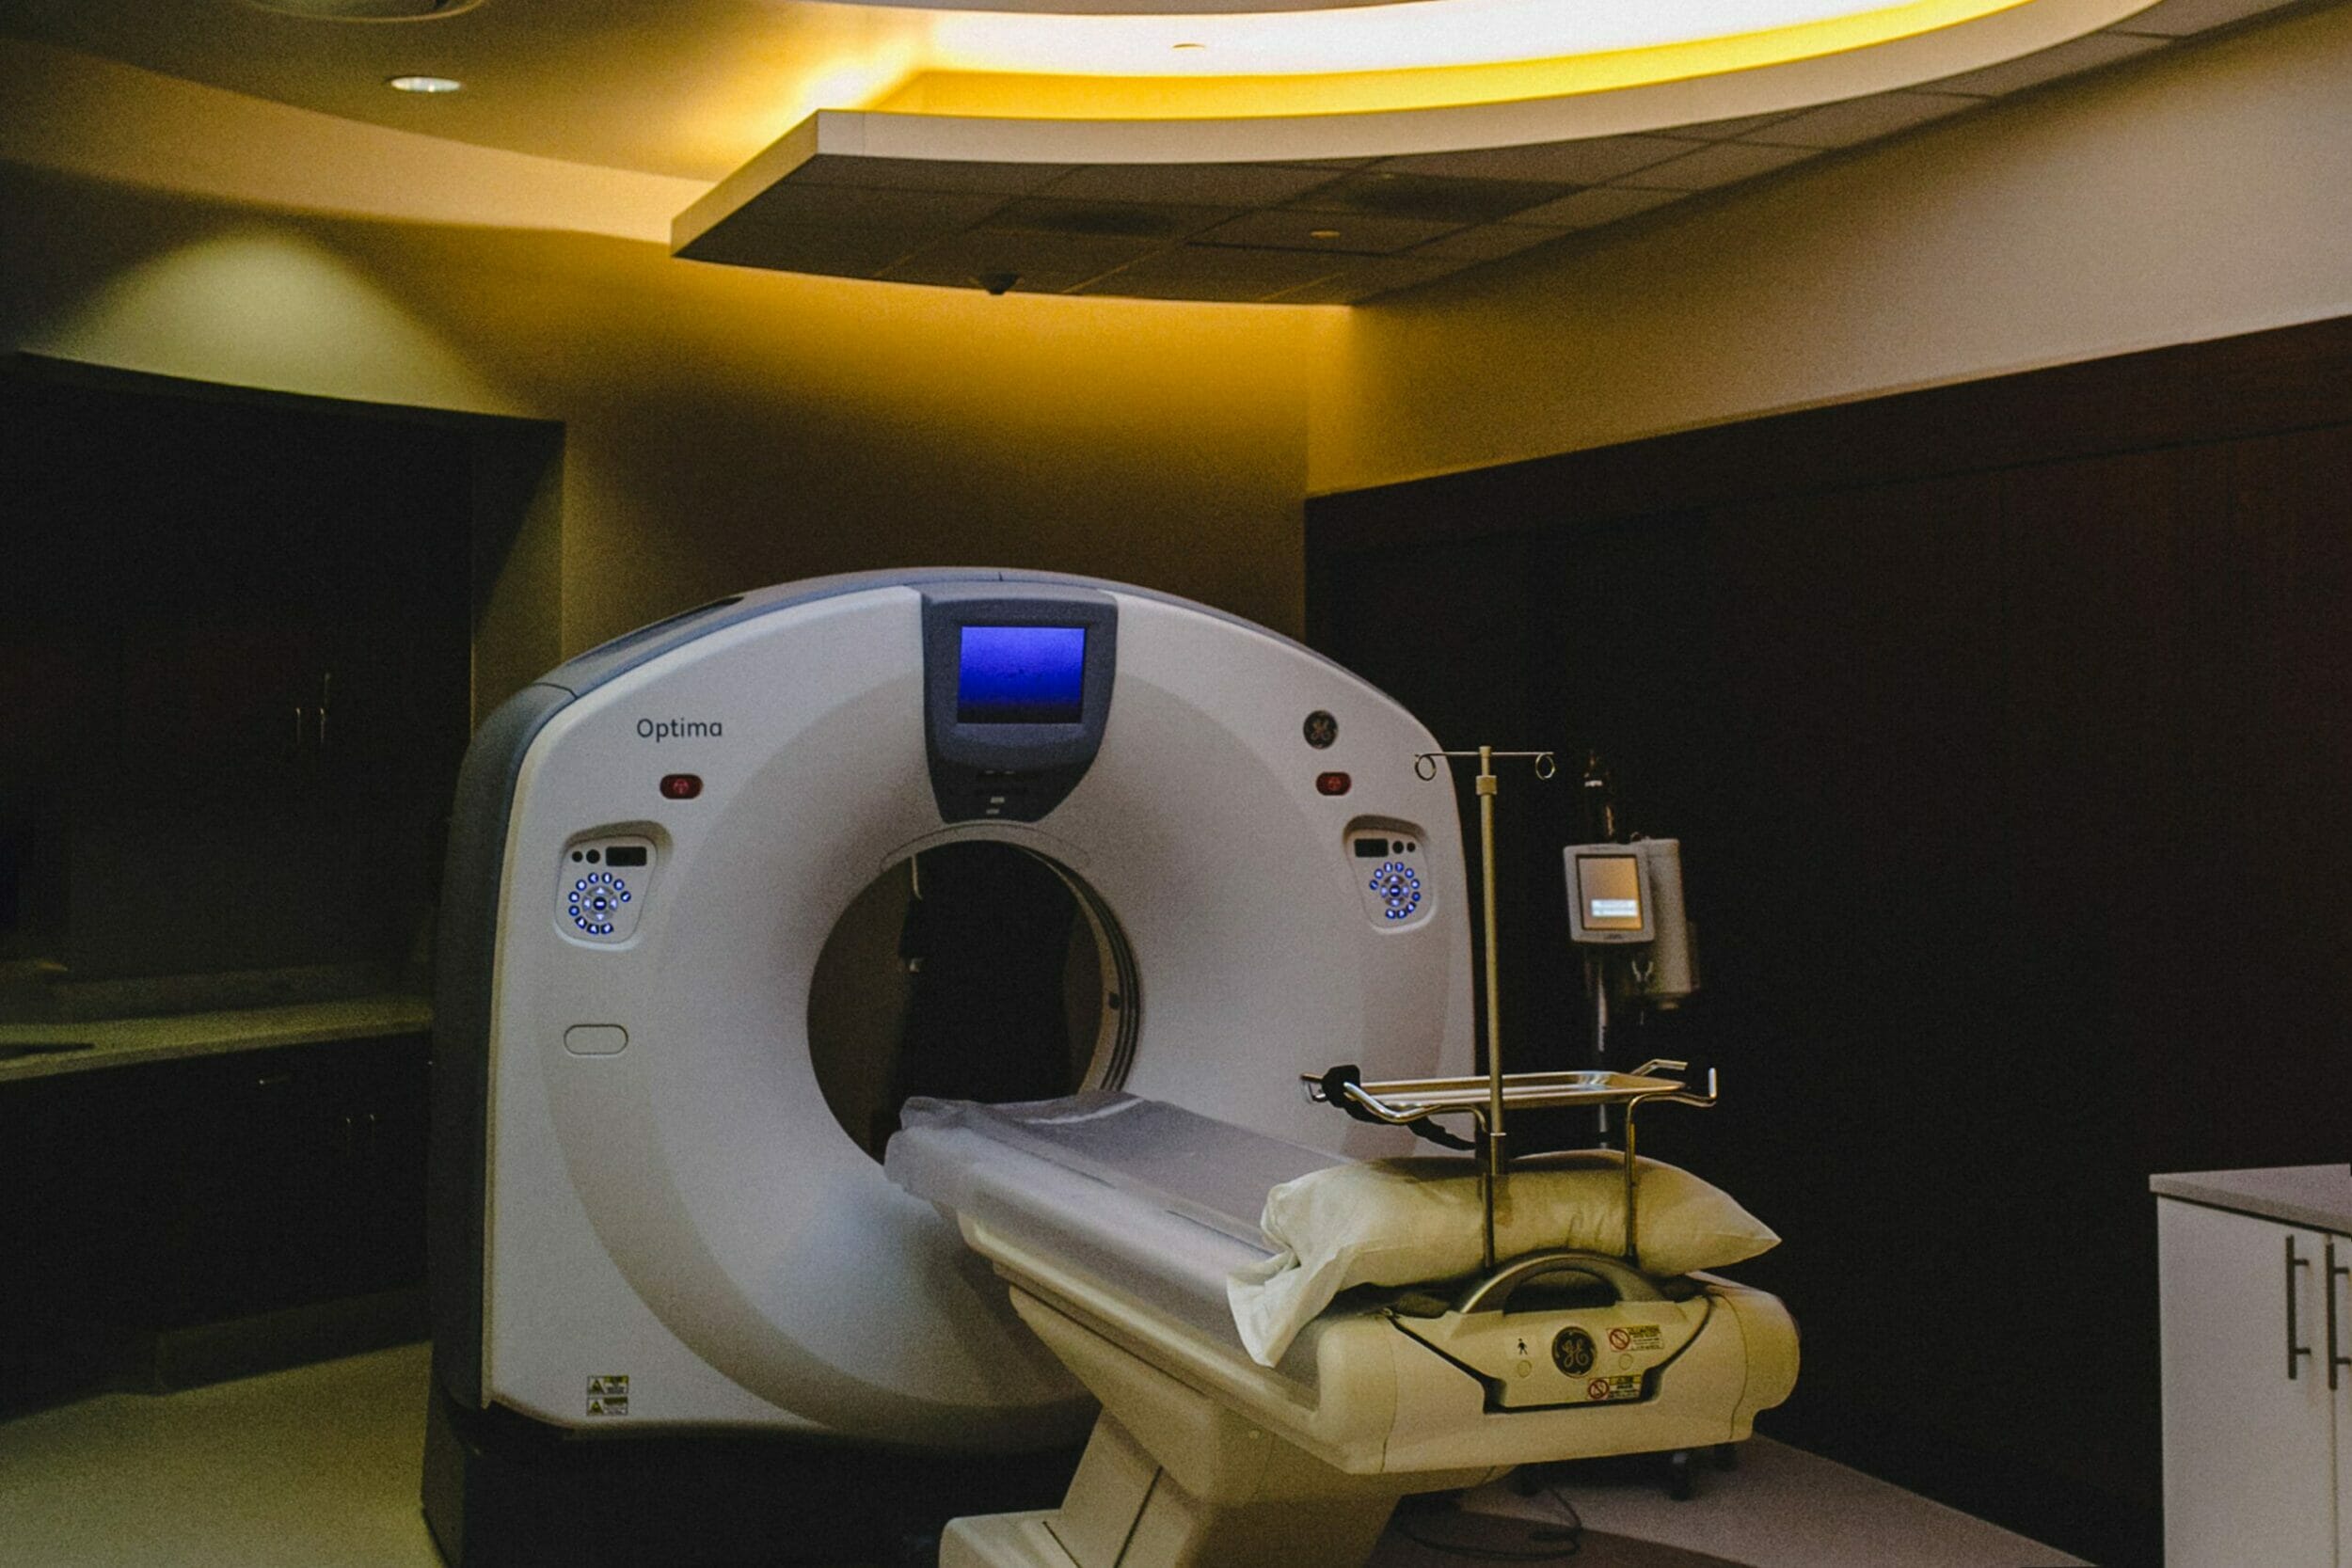 GE Optima CT Scan machine in dark room with fake sky and tree ceiling